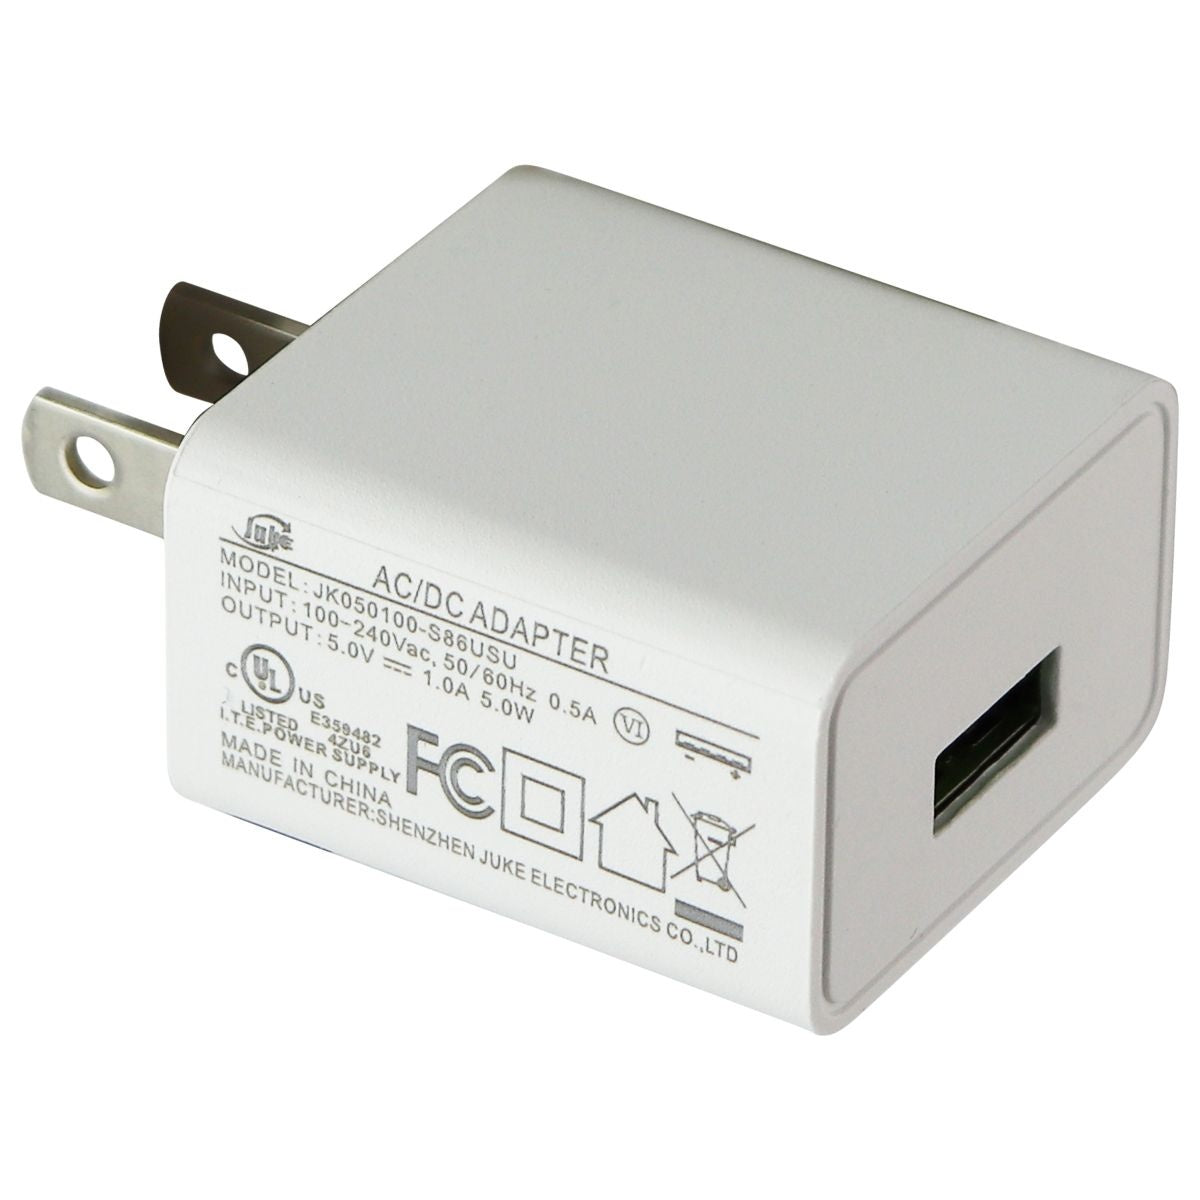 Shenzen USB AC/DC Wall Adapter (5V/1A) - White (JK050100-S86USU) Multipurpose Batteries & Power - Multipurpose AC to DC Adapters Shenzen    - Simple Cell Bulk Wholesale Pricing - USA Seller